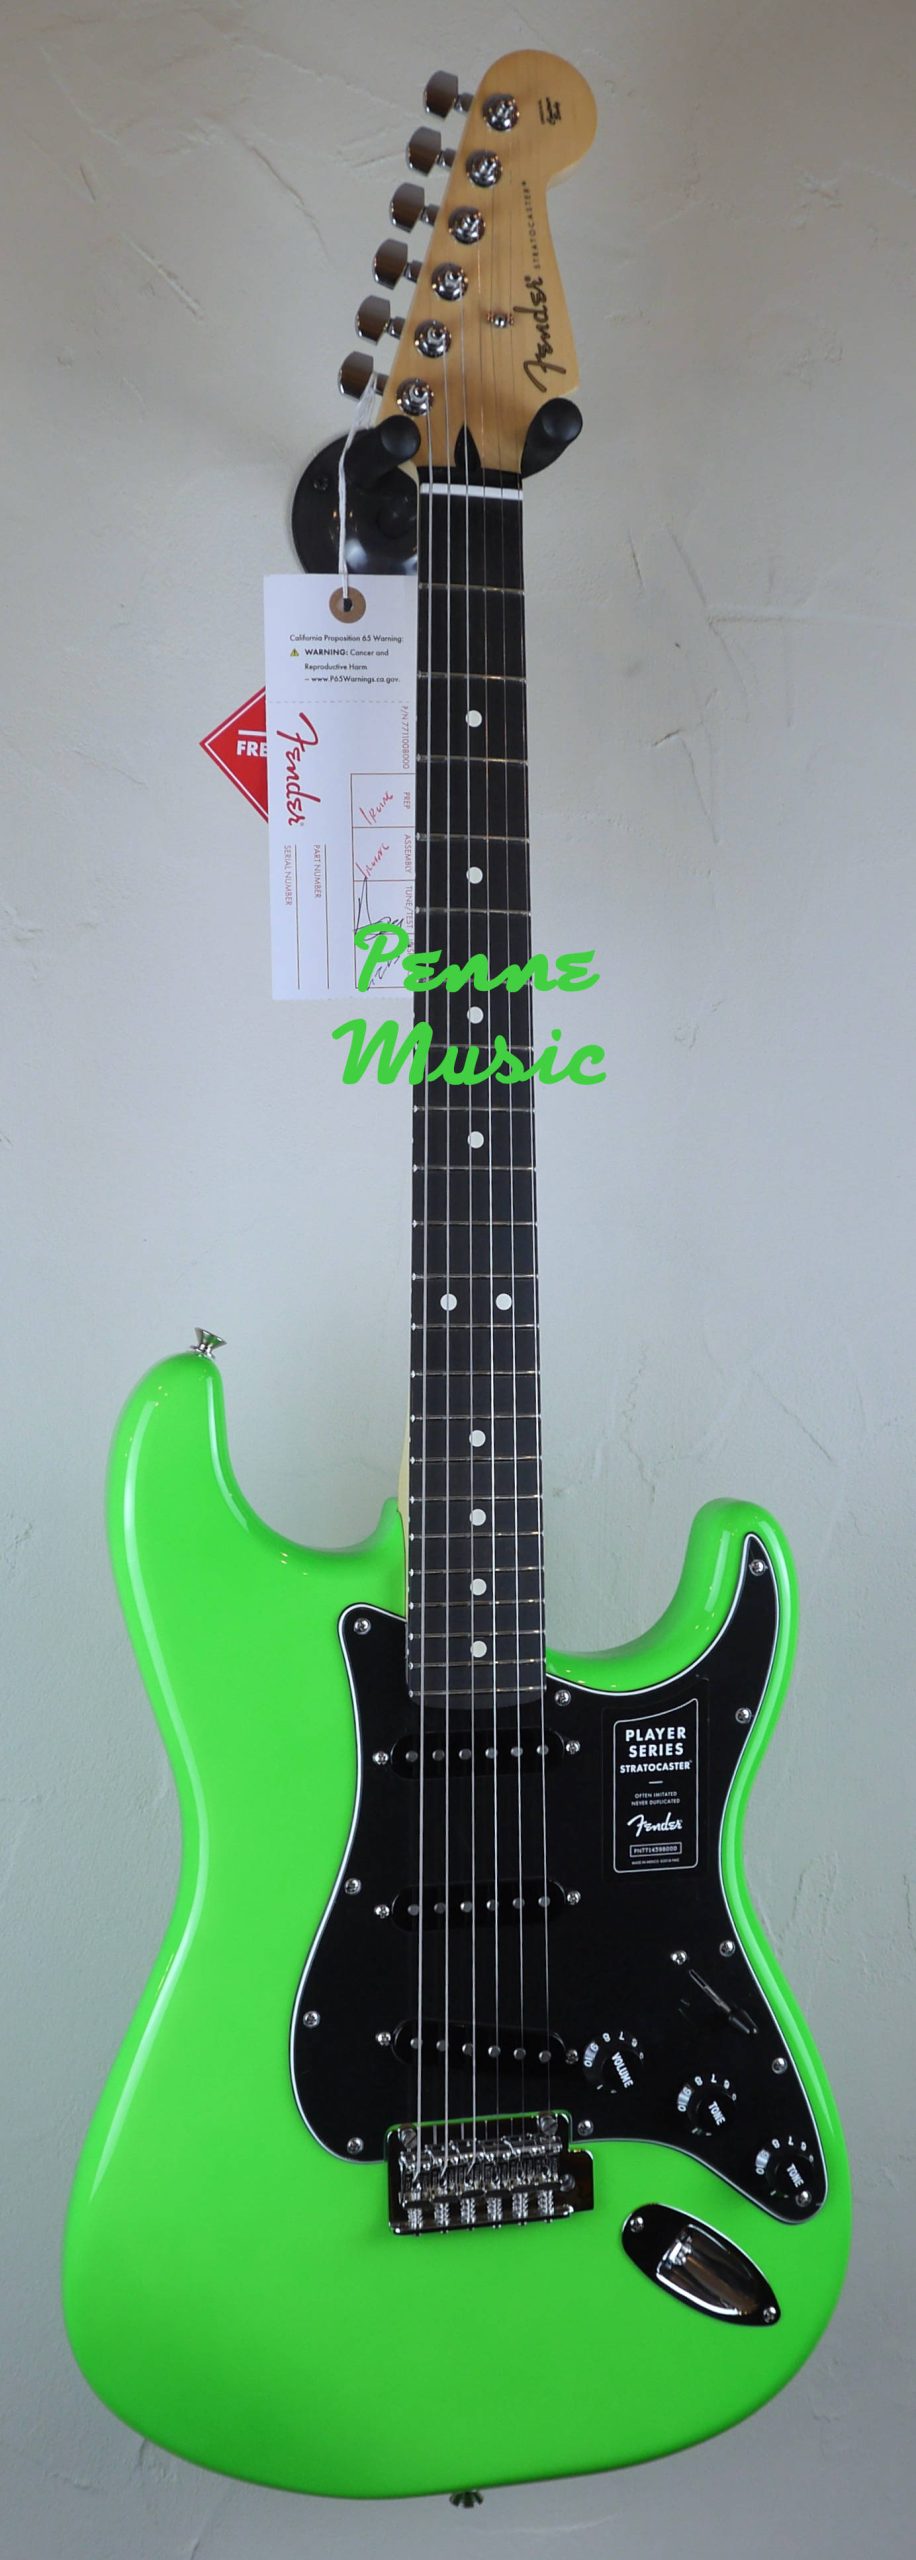 Fender Limited Edition Player Stratocaster Neon Green with Ebony Fingerboard 1